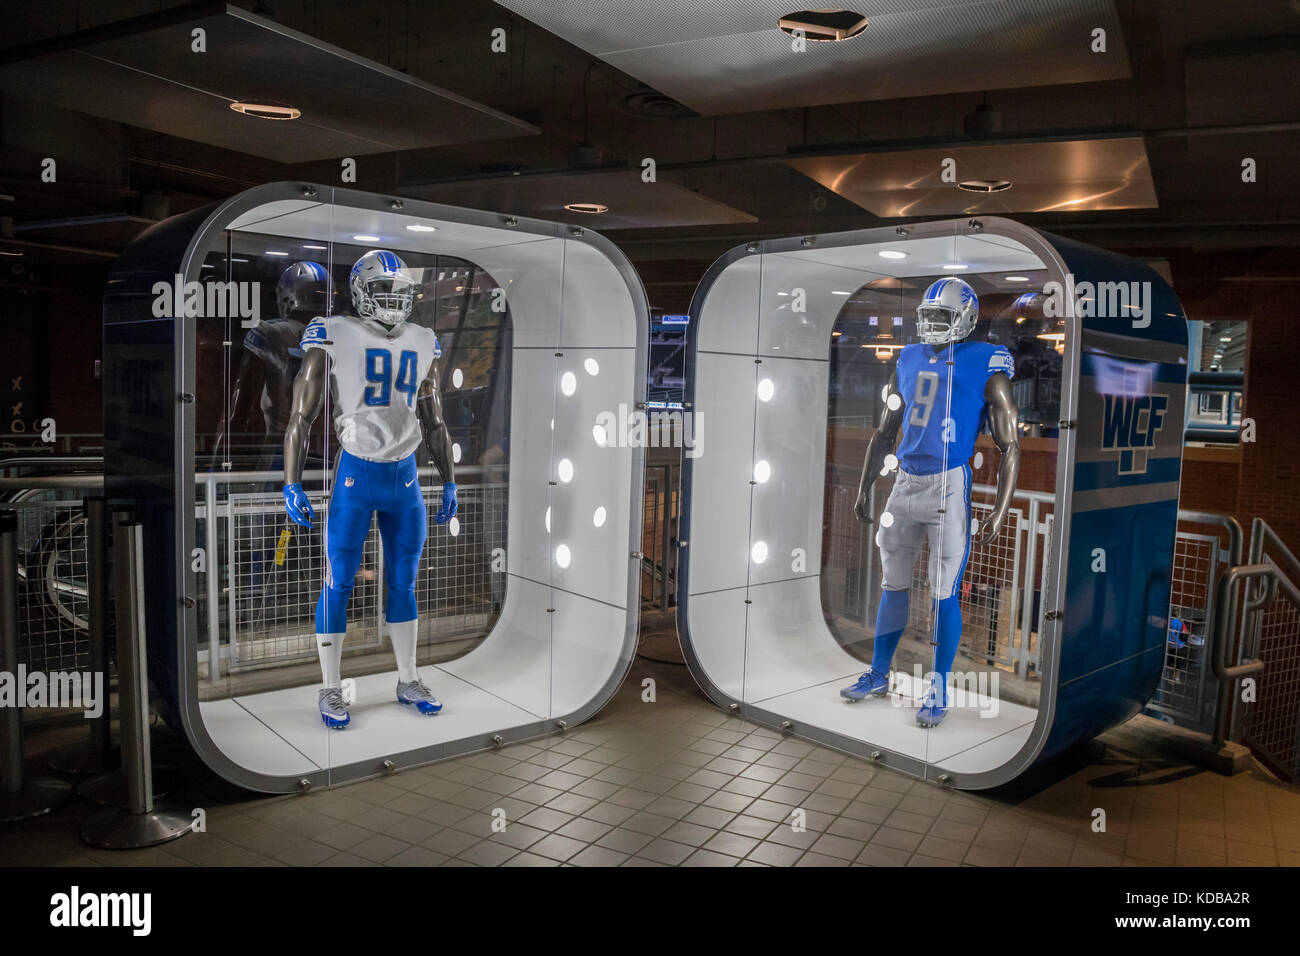 Detroit, Michigan - Uniforms of the Detroit Lions on display at Ford Field. The home uniform is at right; the away uniform is at left. Stock Photo